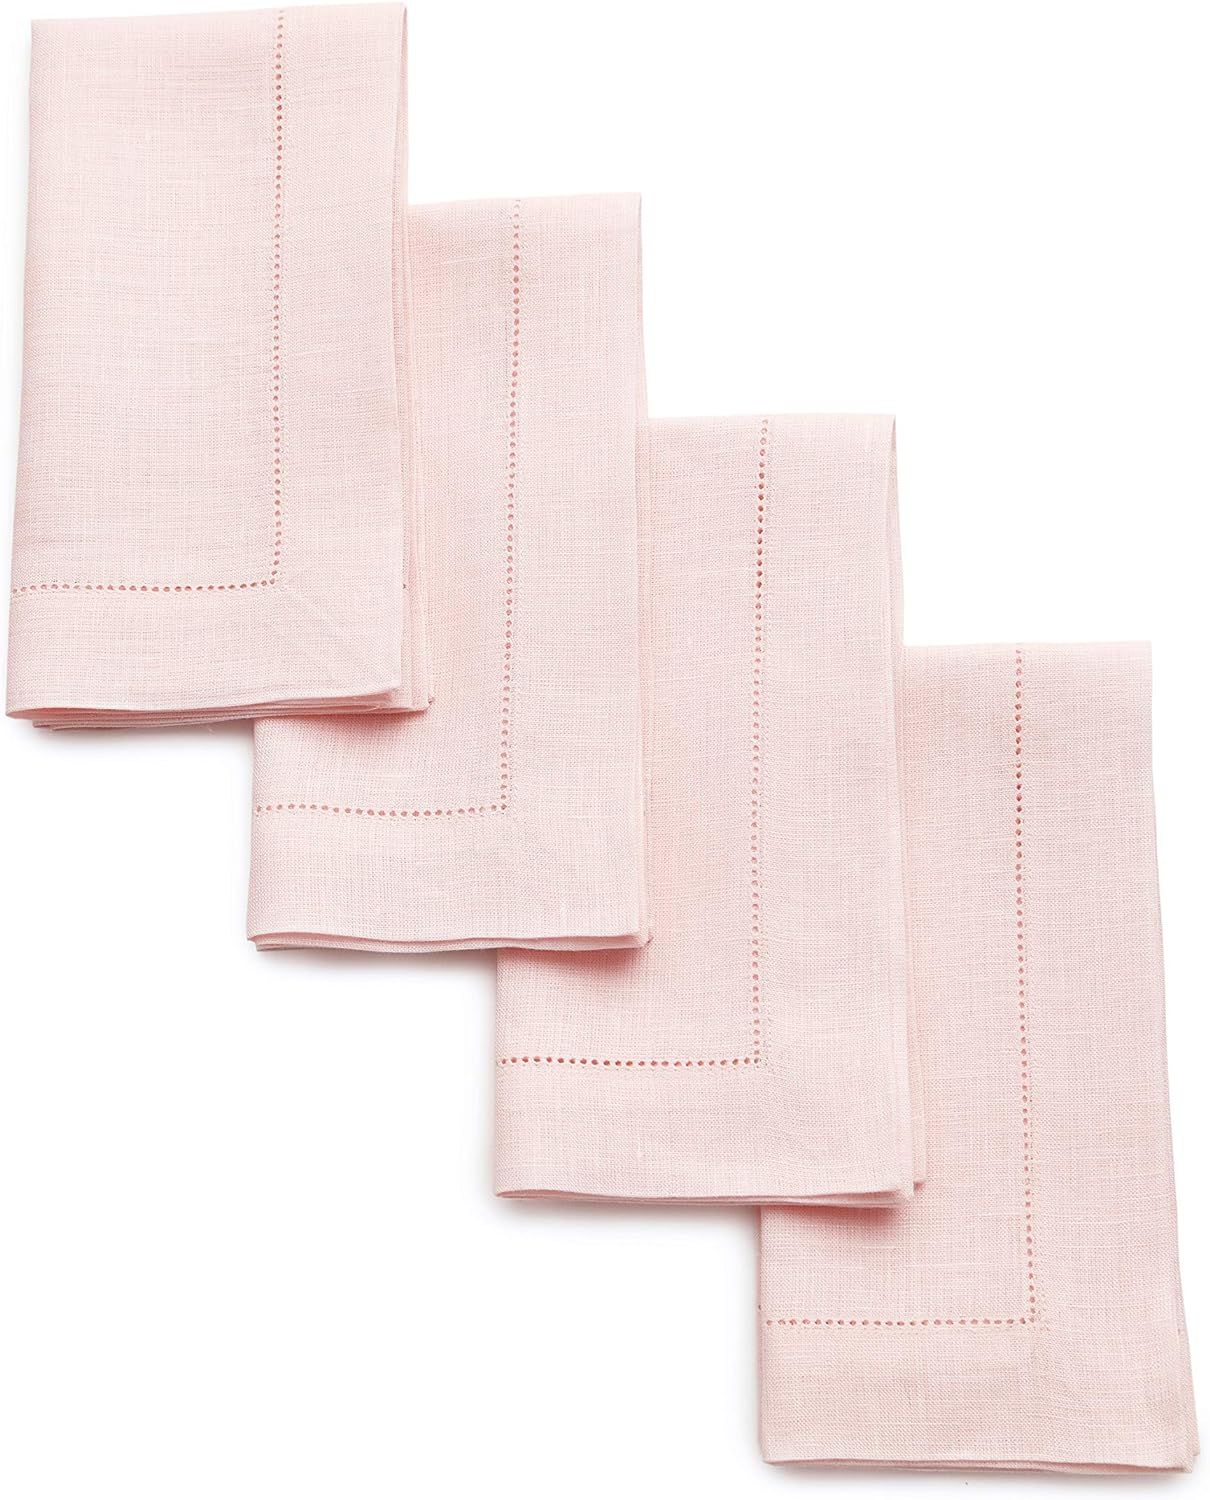 Solino Home 100% Pure Linen Hemstitch Dinner Napkins - 20 x 20 Inch, Pink Set of 4, European Flax... | Amazon (US)